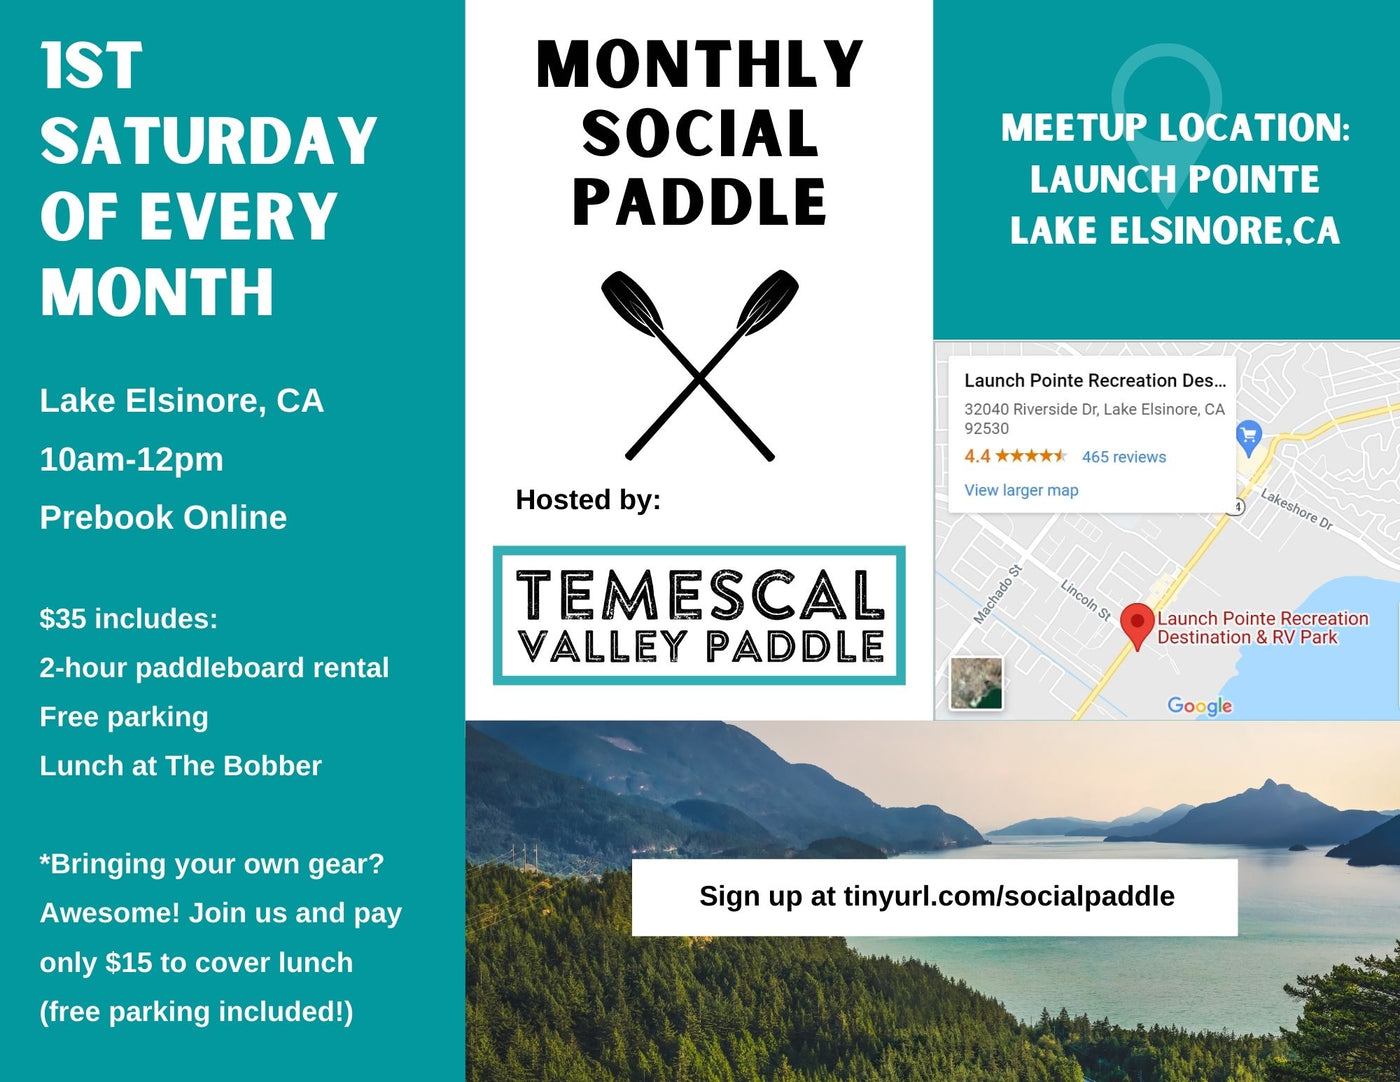 Monthly Social Paddle Event at Lake Elsinore